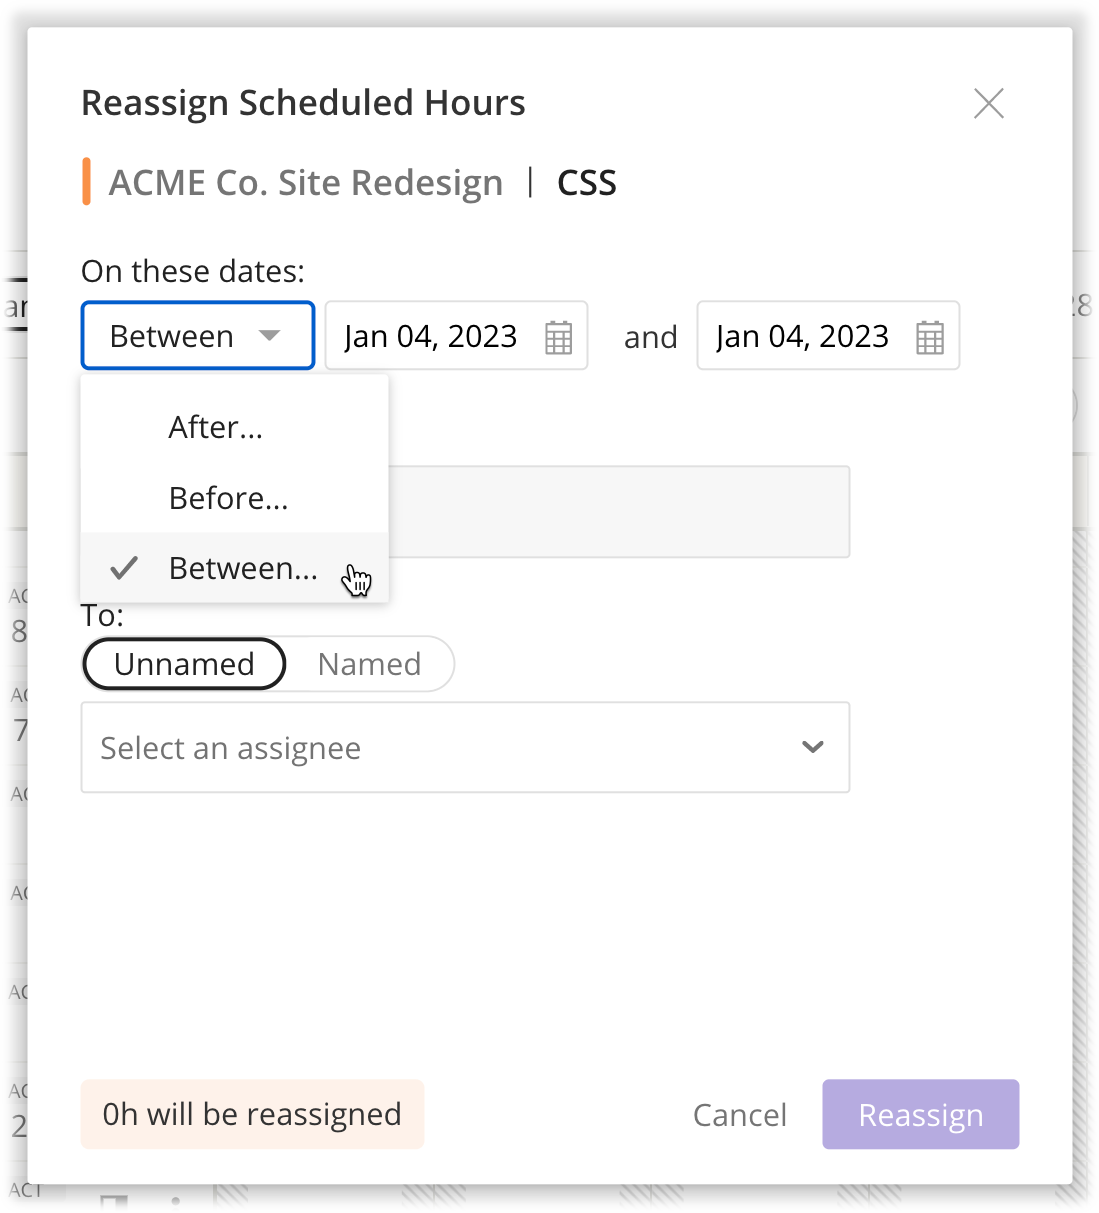 Date_options_in_Reassign_Scheduled_Hours_modal.png